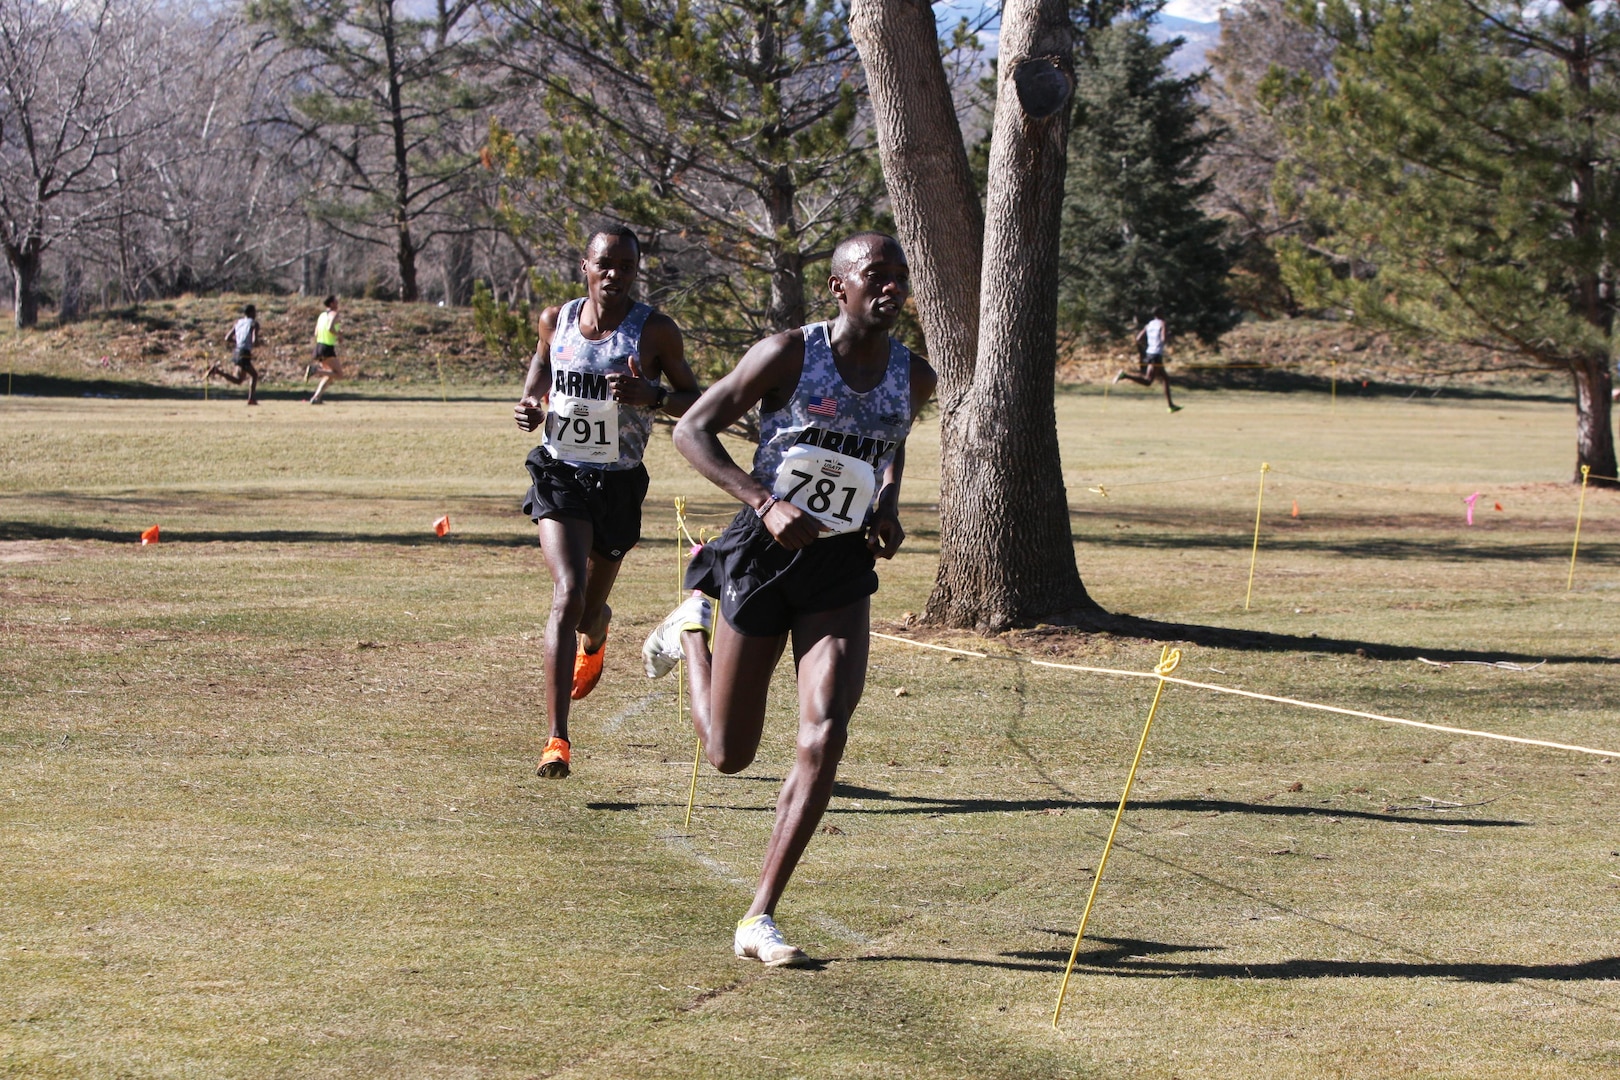 Gold Medalist Army Pfc. Stanley Kebenei, USAR Ark. (bib 781) and  silver medalist Army Spc. Augustus Maiyo, Fort Carson, Colo. taking the lead at the 2015 Armed Forces Cross Country Championship.

The 2015 Armed Forces Cross Country Championship was held conducted in conjunction with the USA Track and Field Winter National Cross Country Championship in Boulder, Colo. on Feb. 7.